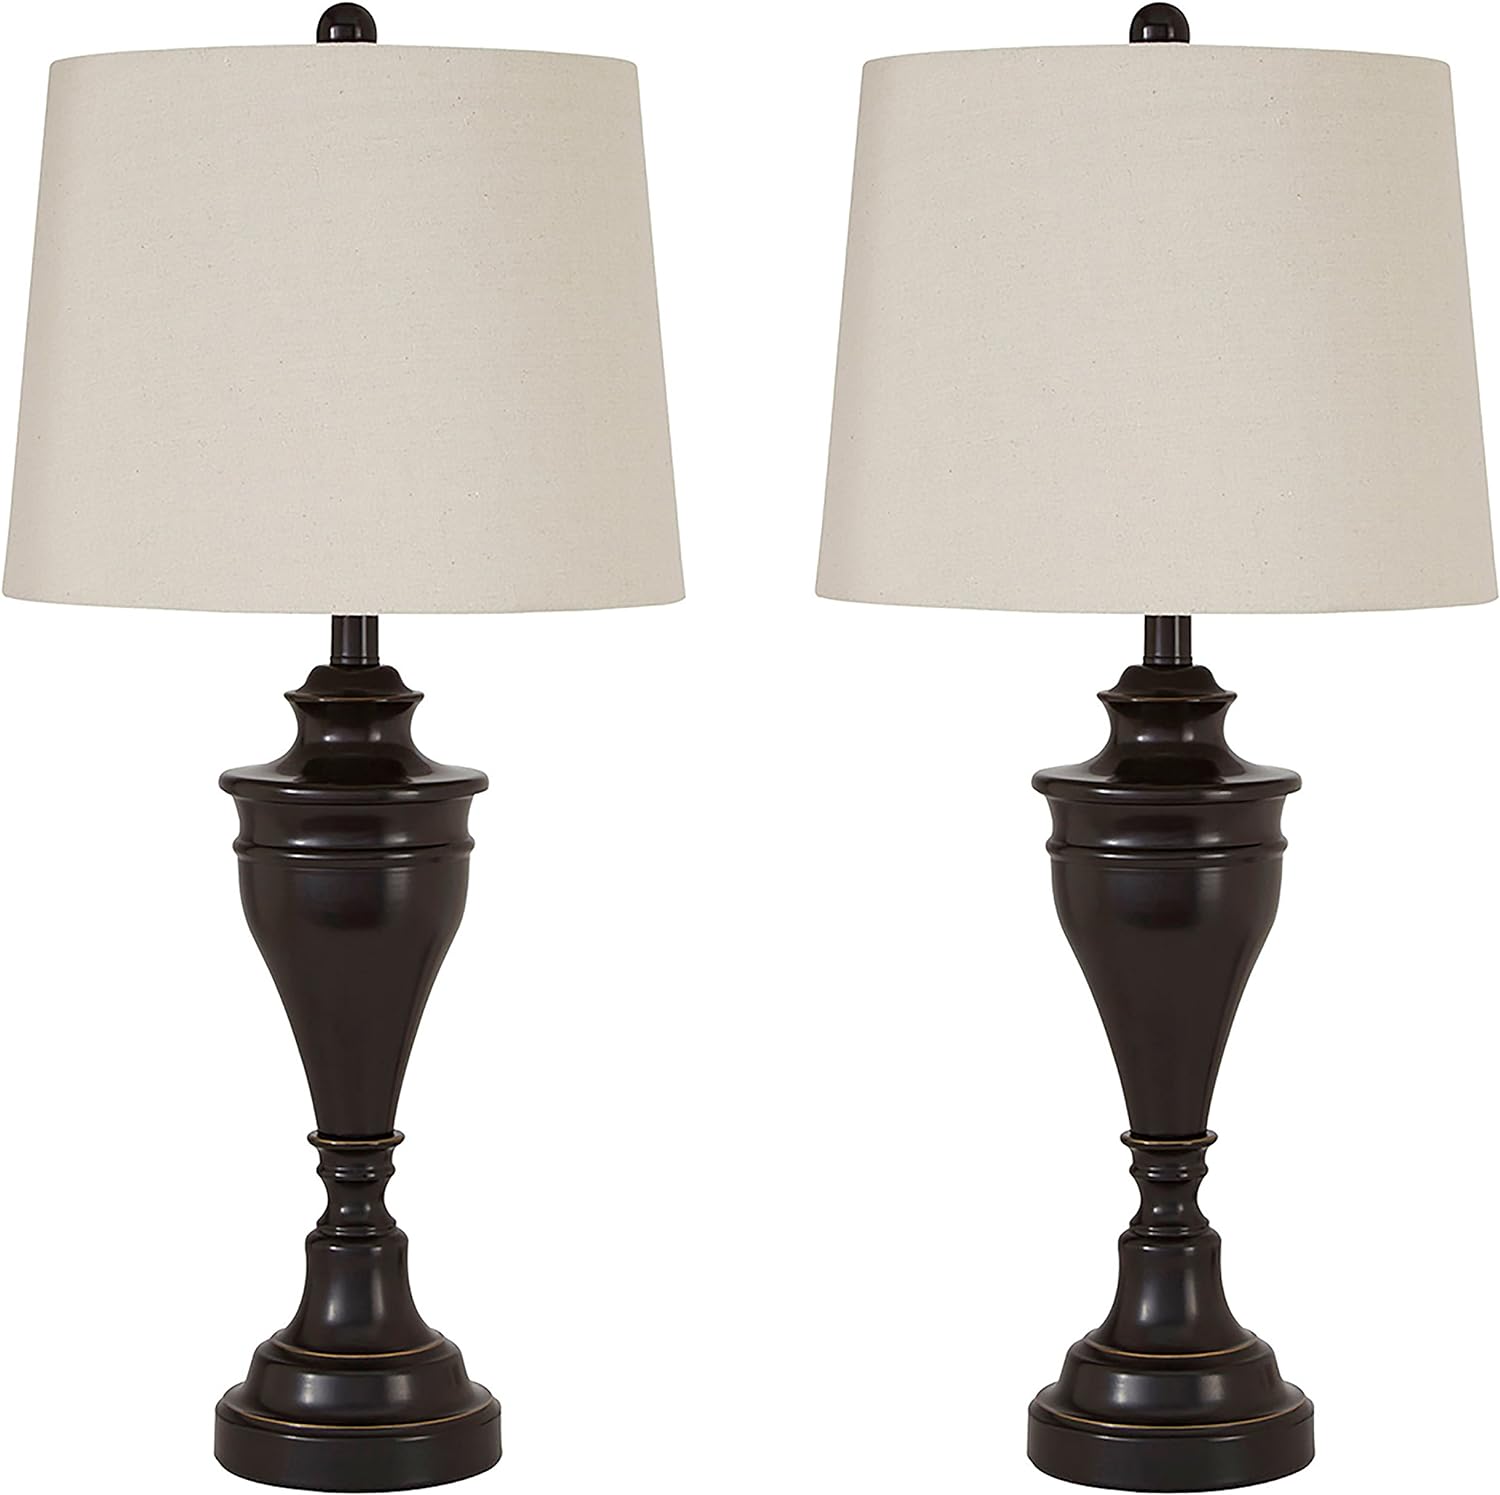 I recently bought this lumps in dark brown for my daughter' housewarming. They are pleasure to look at and have no imperfections. Love natural linen look of shades. They are classic and timeless, and will fit in any decor. I also got linen look curtains, and those look marvelous together. I highly recommend this brand and style of lamps.